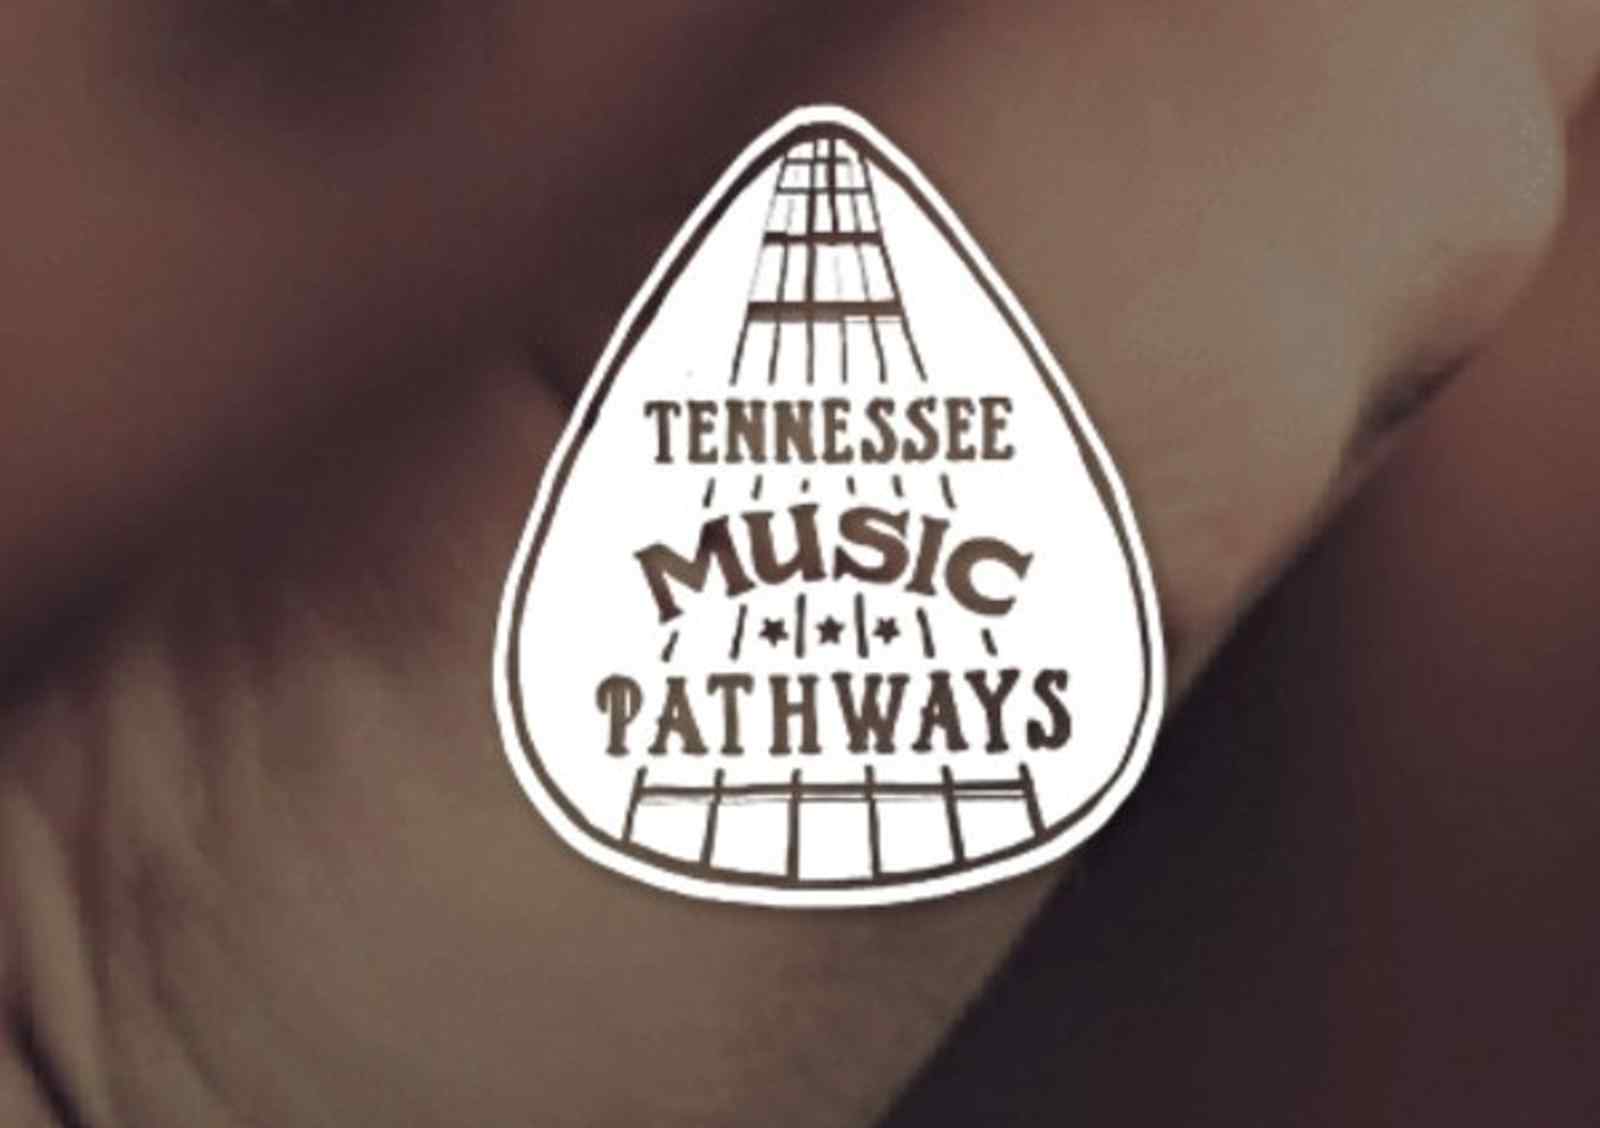 FBA RECOGNIZED AS PART OF TENNESSEE MUSIC PATHWAYS